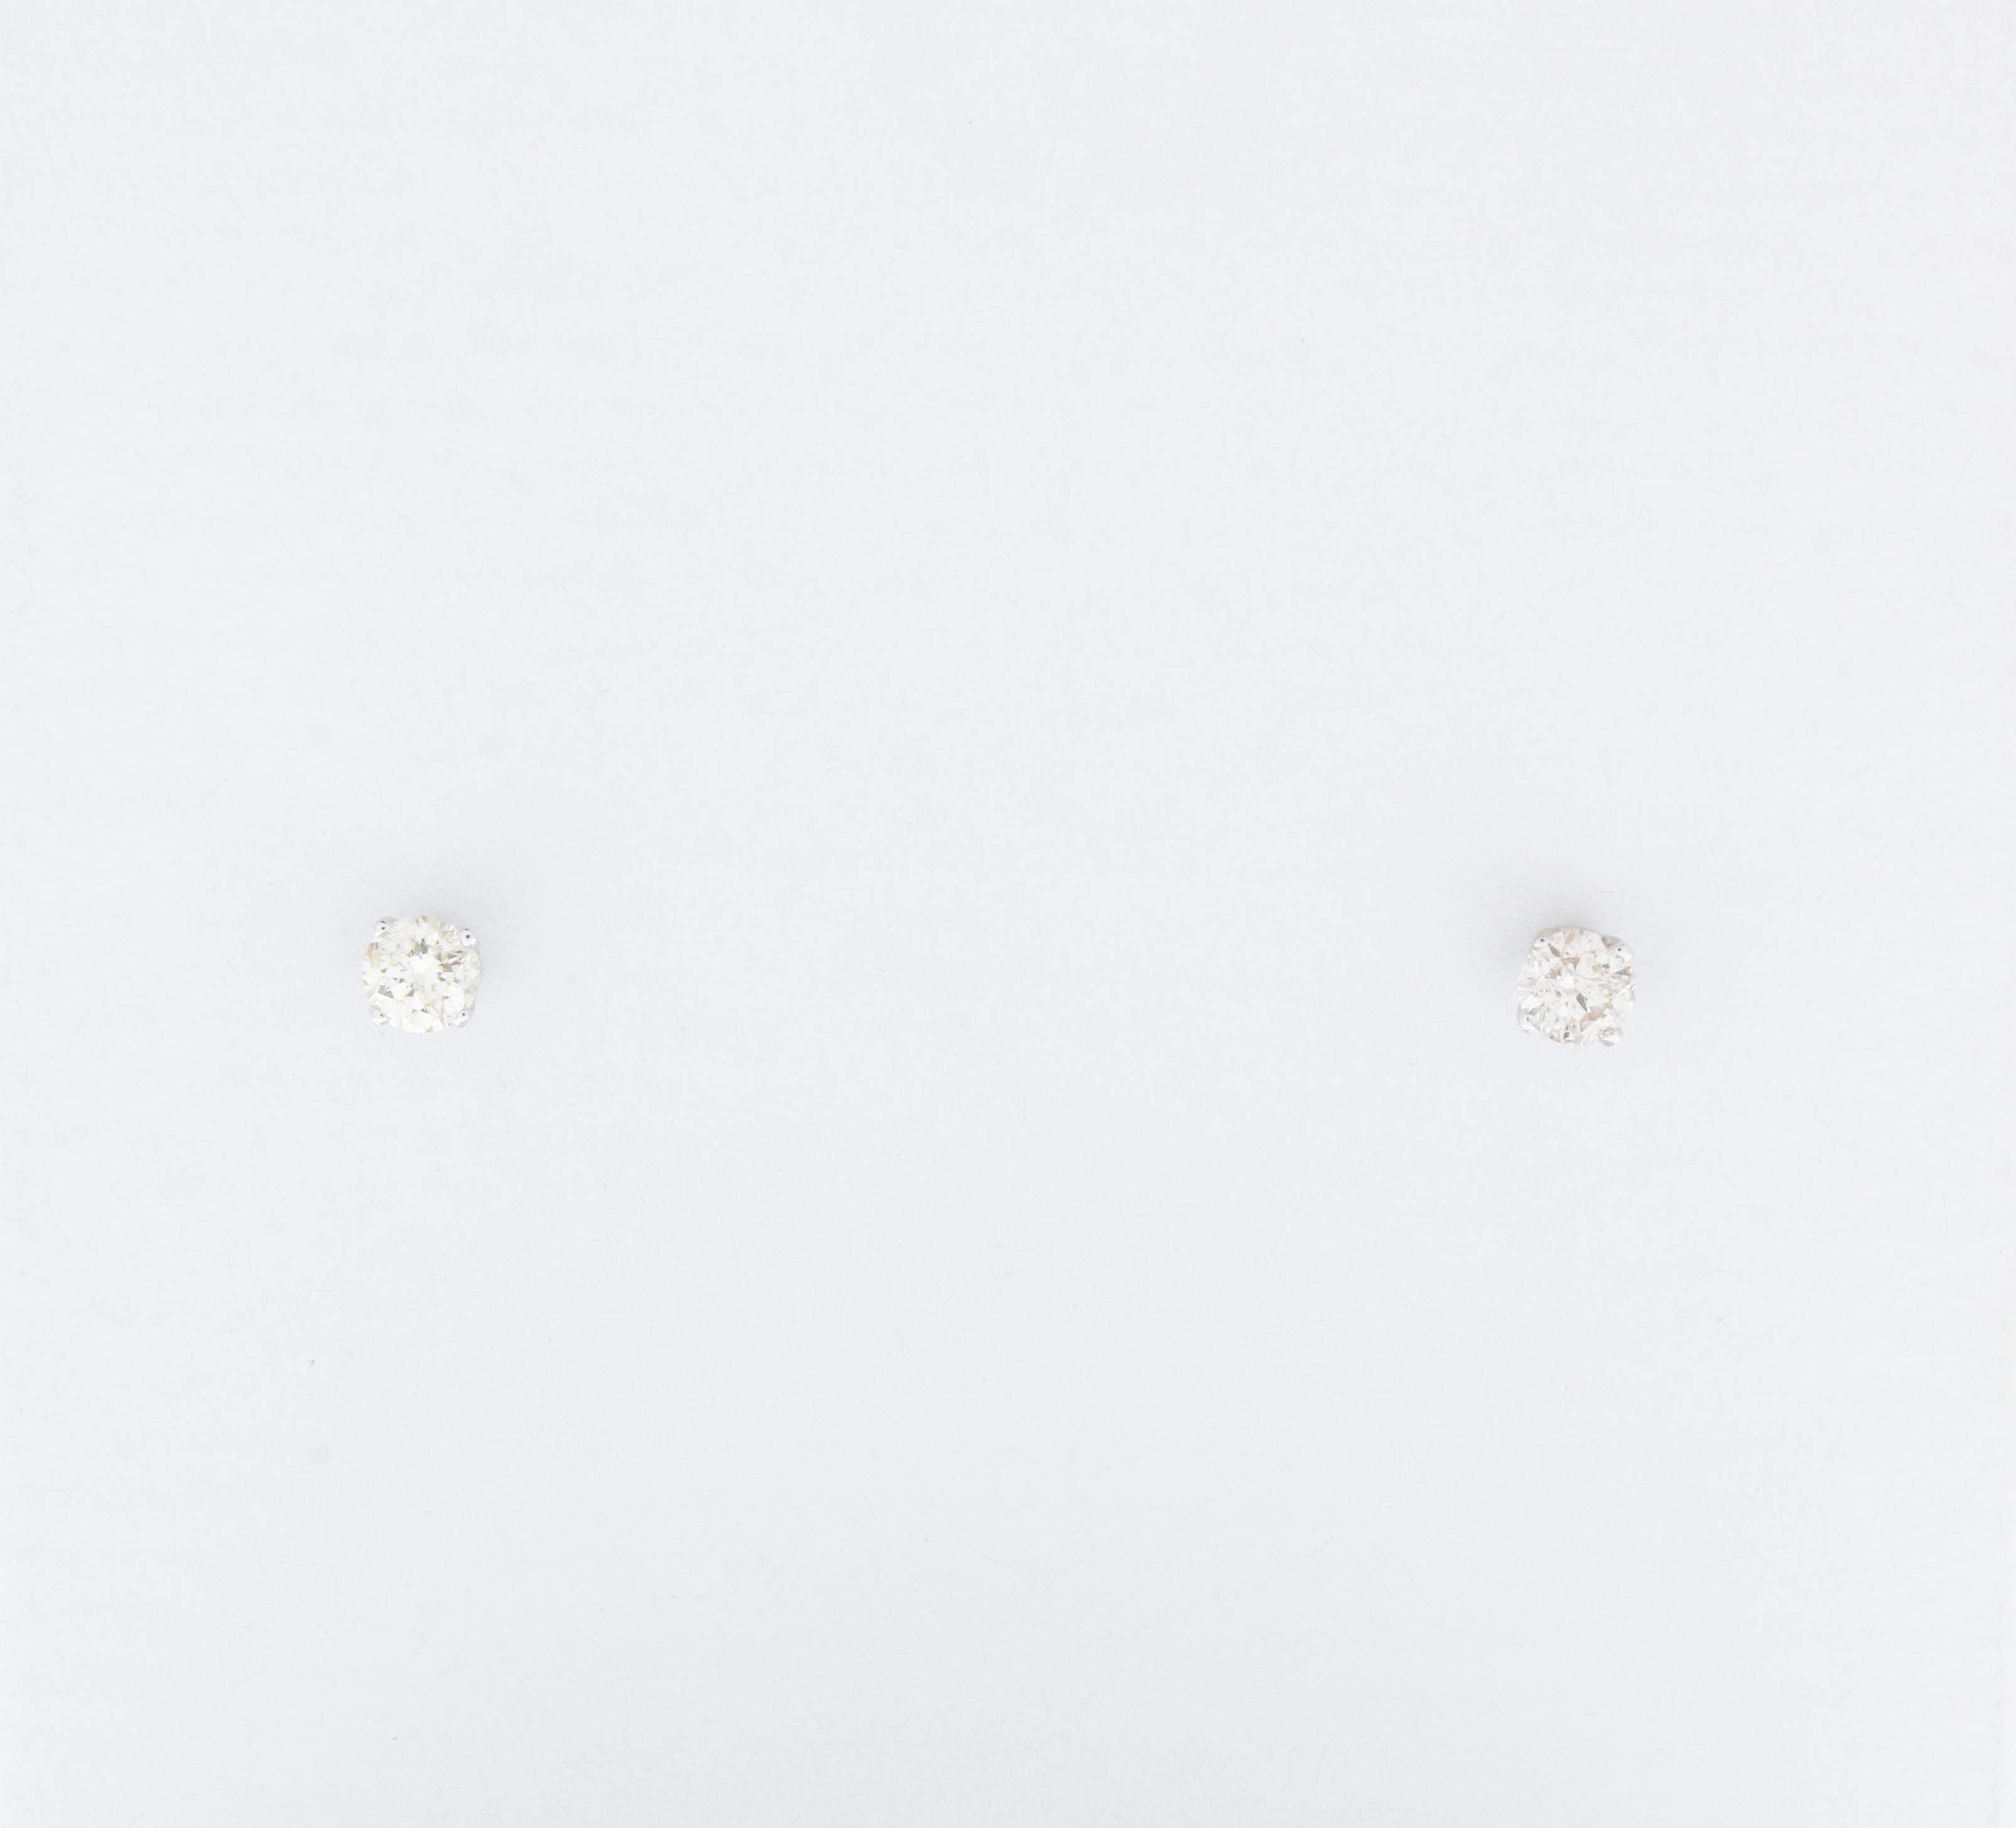 Stunning 14 Karat white gold handmade earrings featuring 2 round brilliant cut diamonds weighing 0.25 carat total I-J color and I1 clarity. These gorgeous earrings are classic and timelessly elegant.